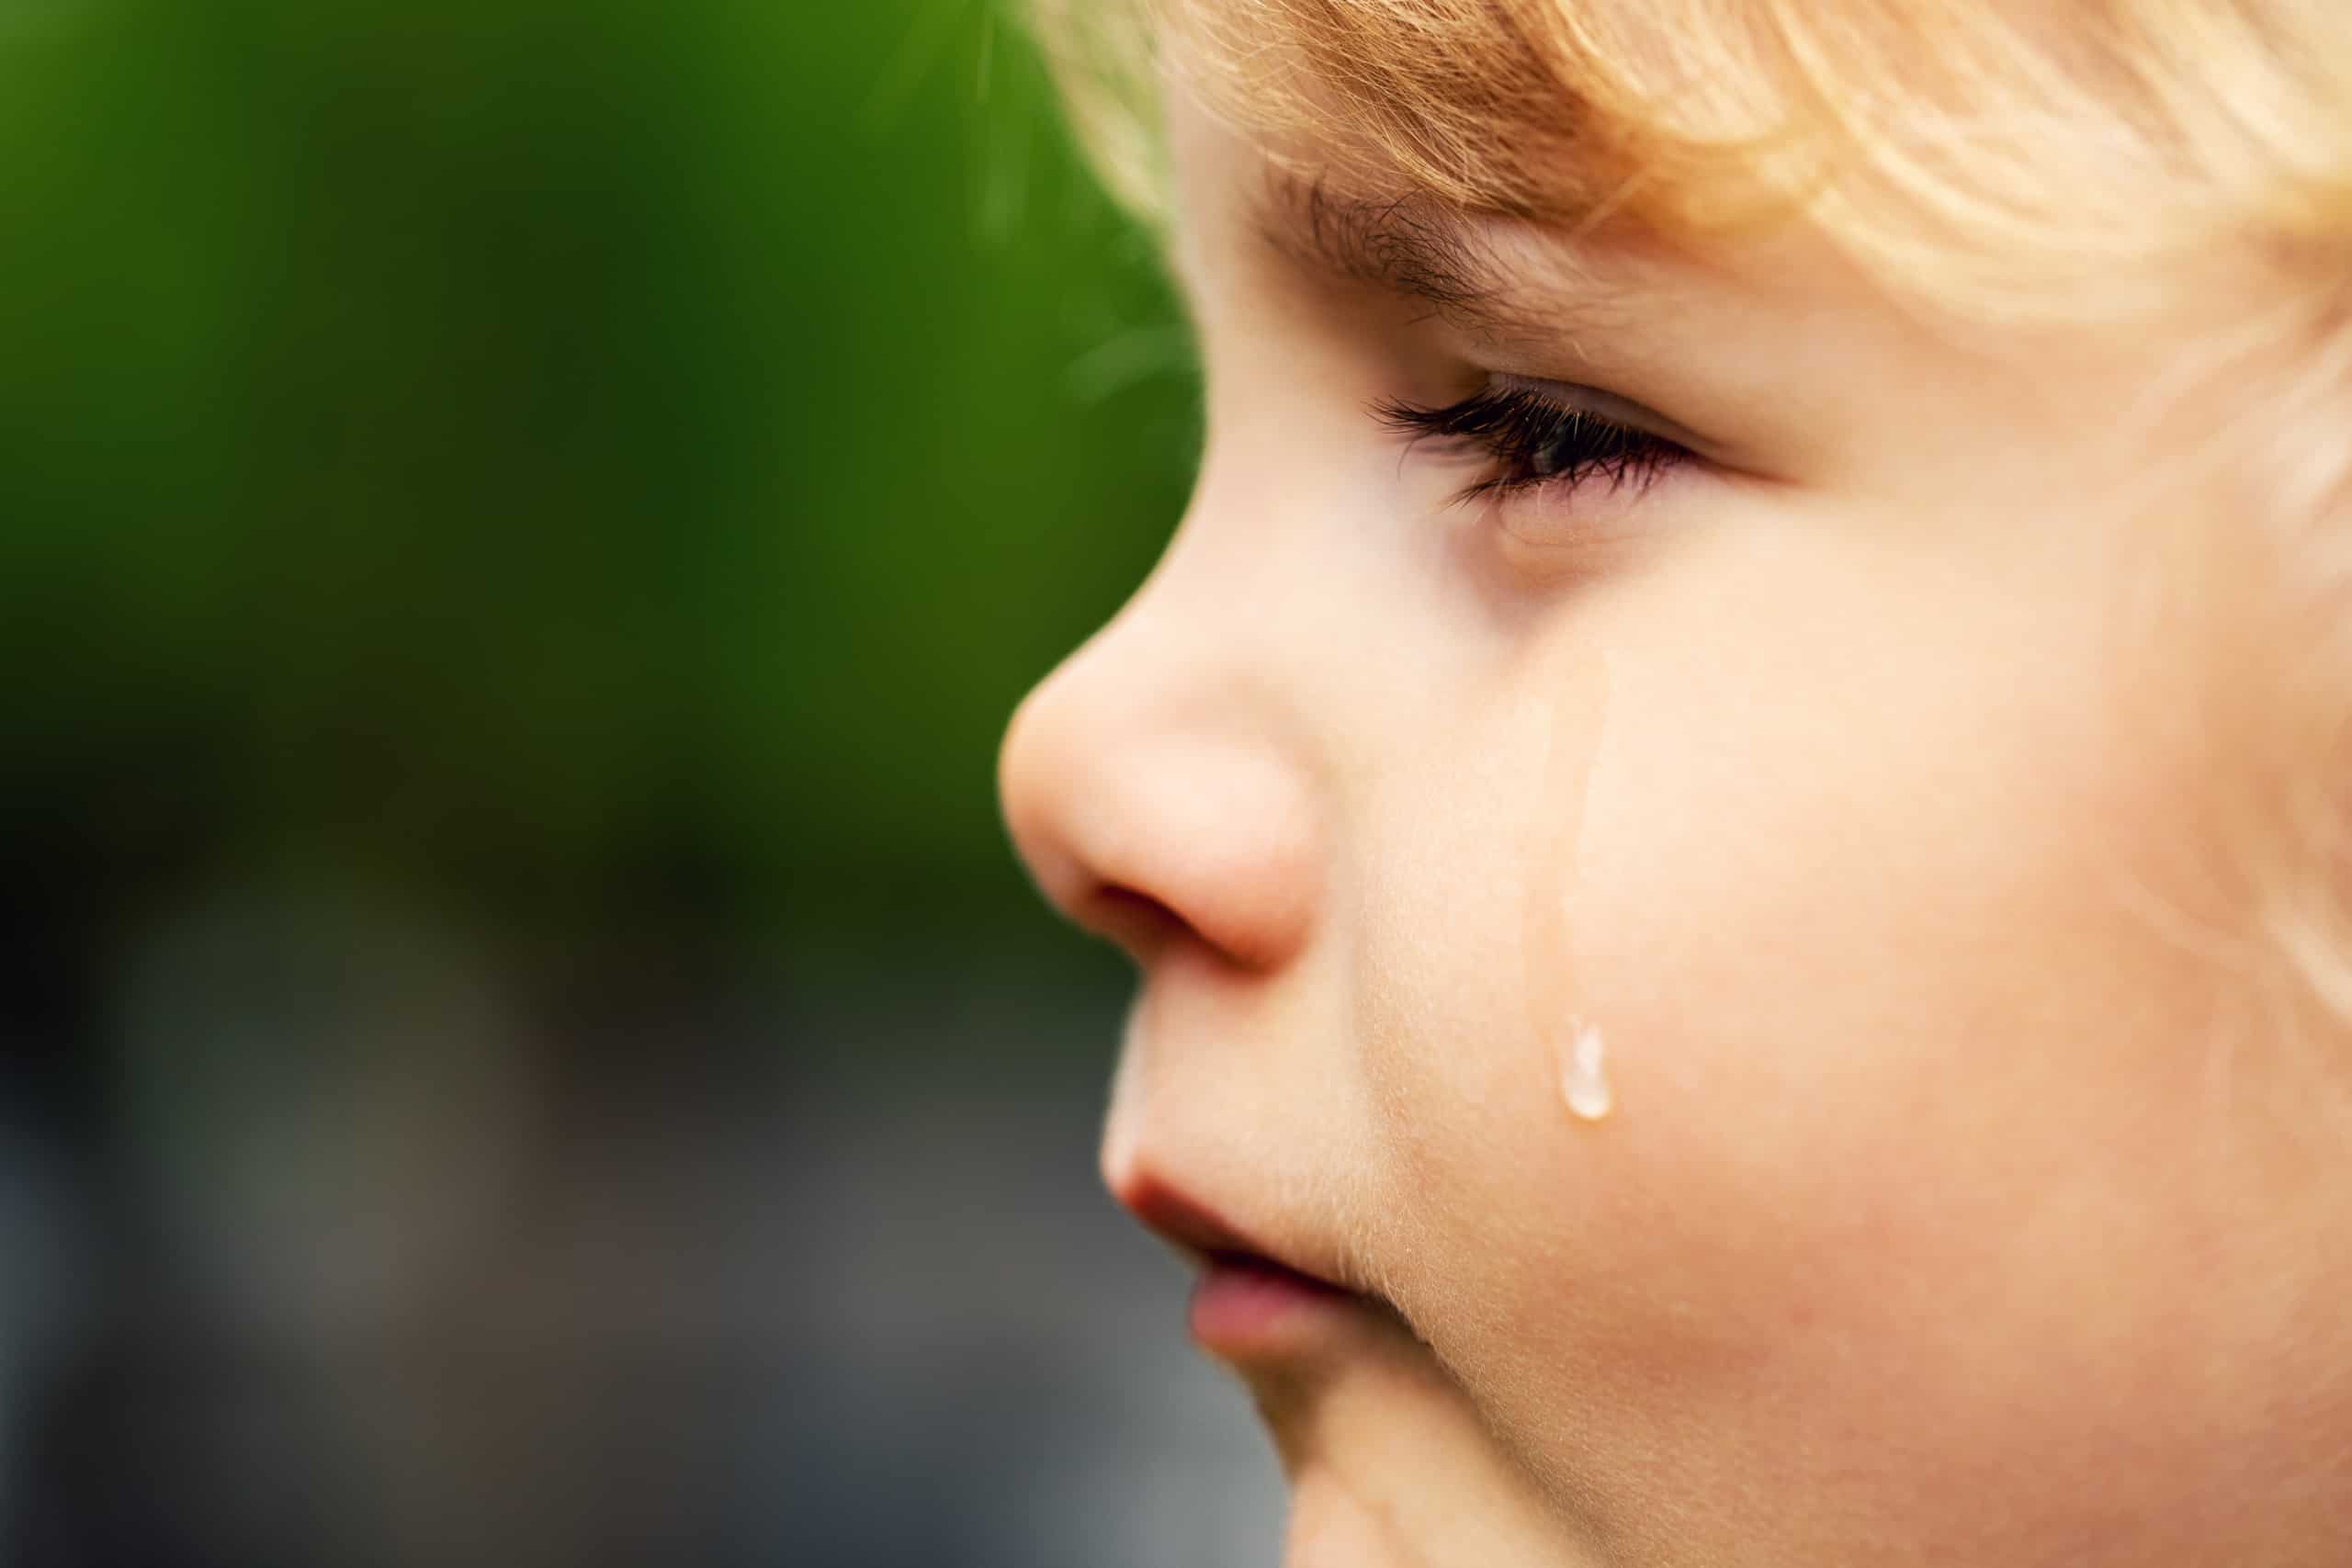 crying sad child - little girl face with tear on the cheek; normalizing emotions